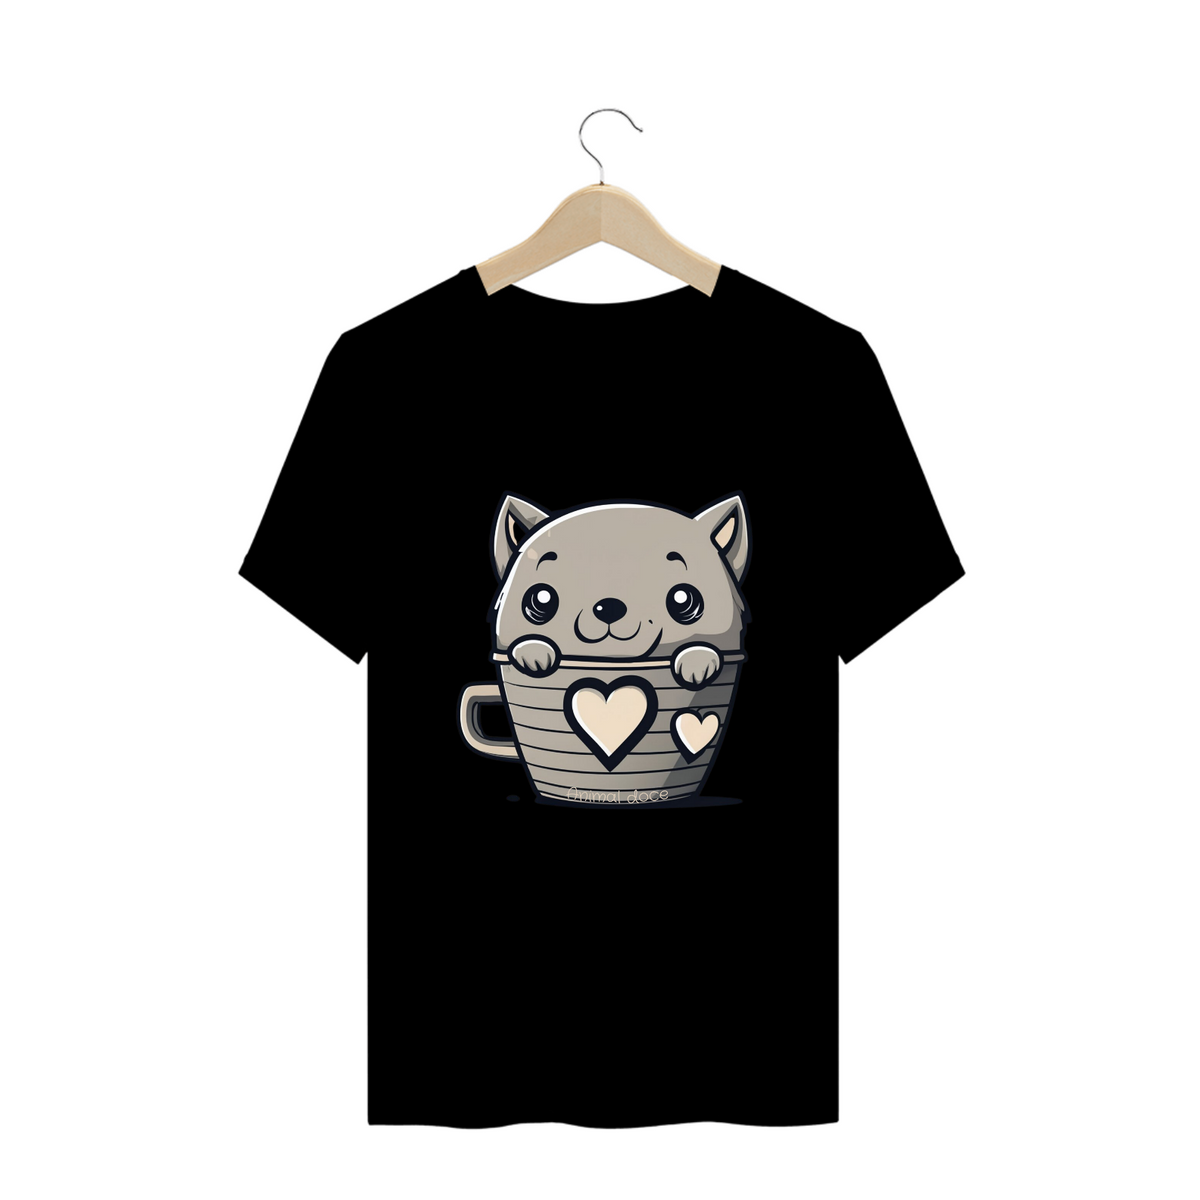 Nome do produto: CAMISETA T-SHIRT PLUS SIZE, CAT IN THE CUP